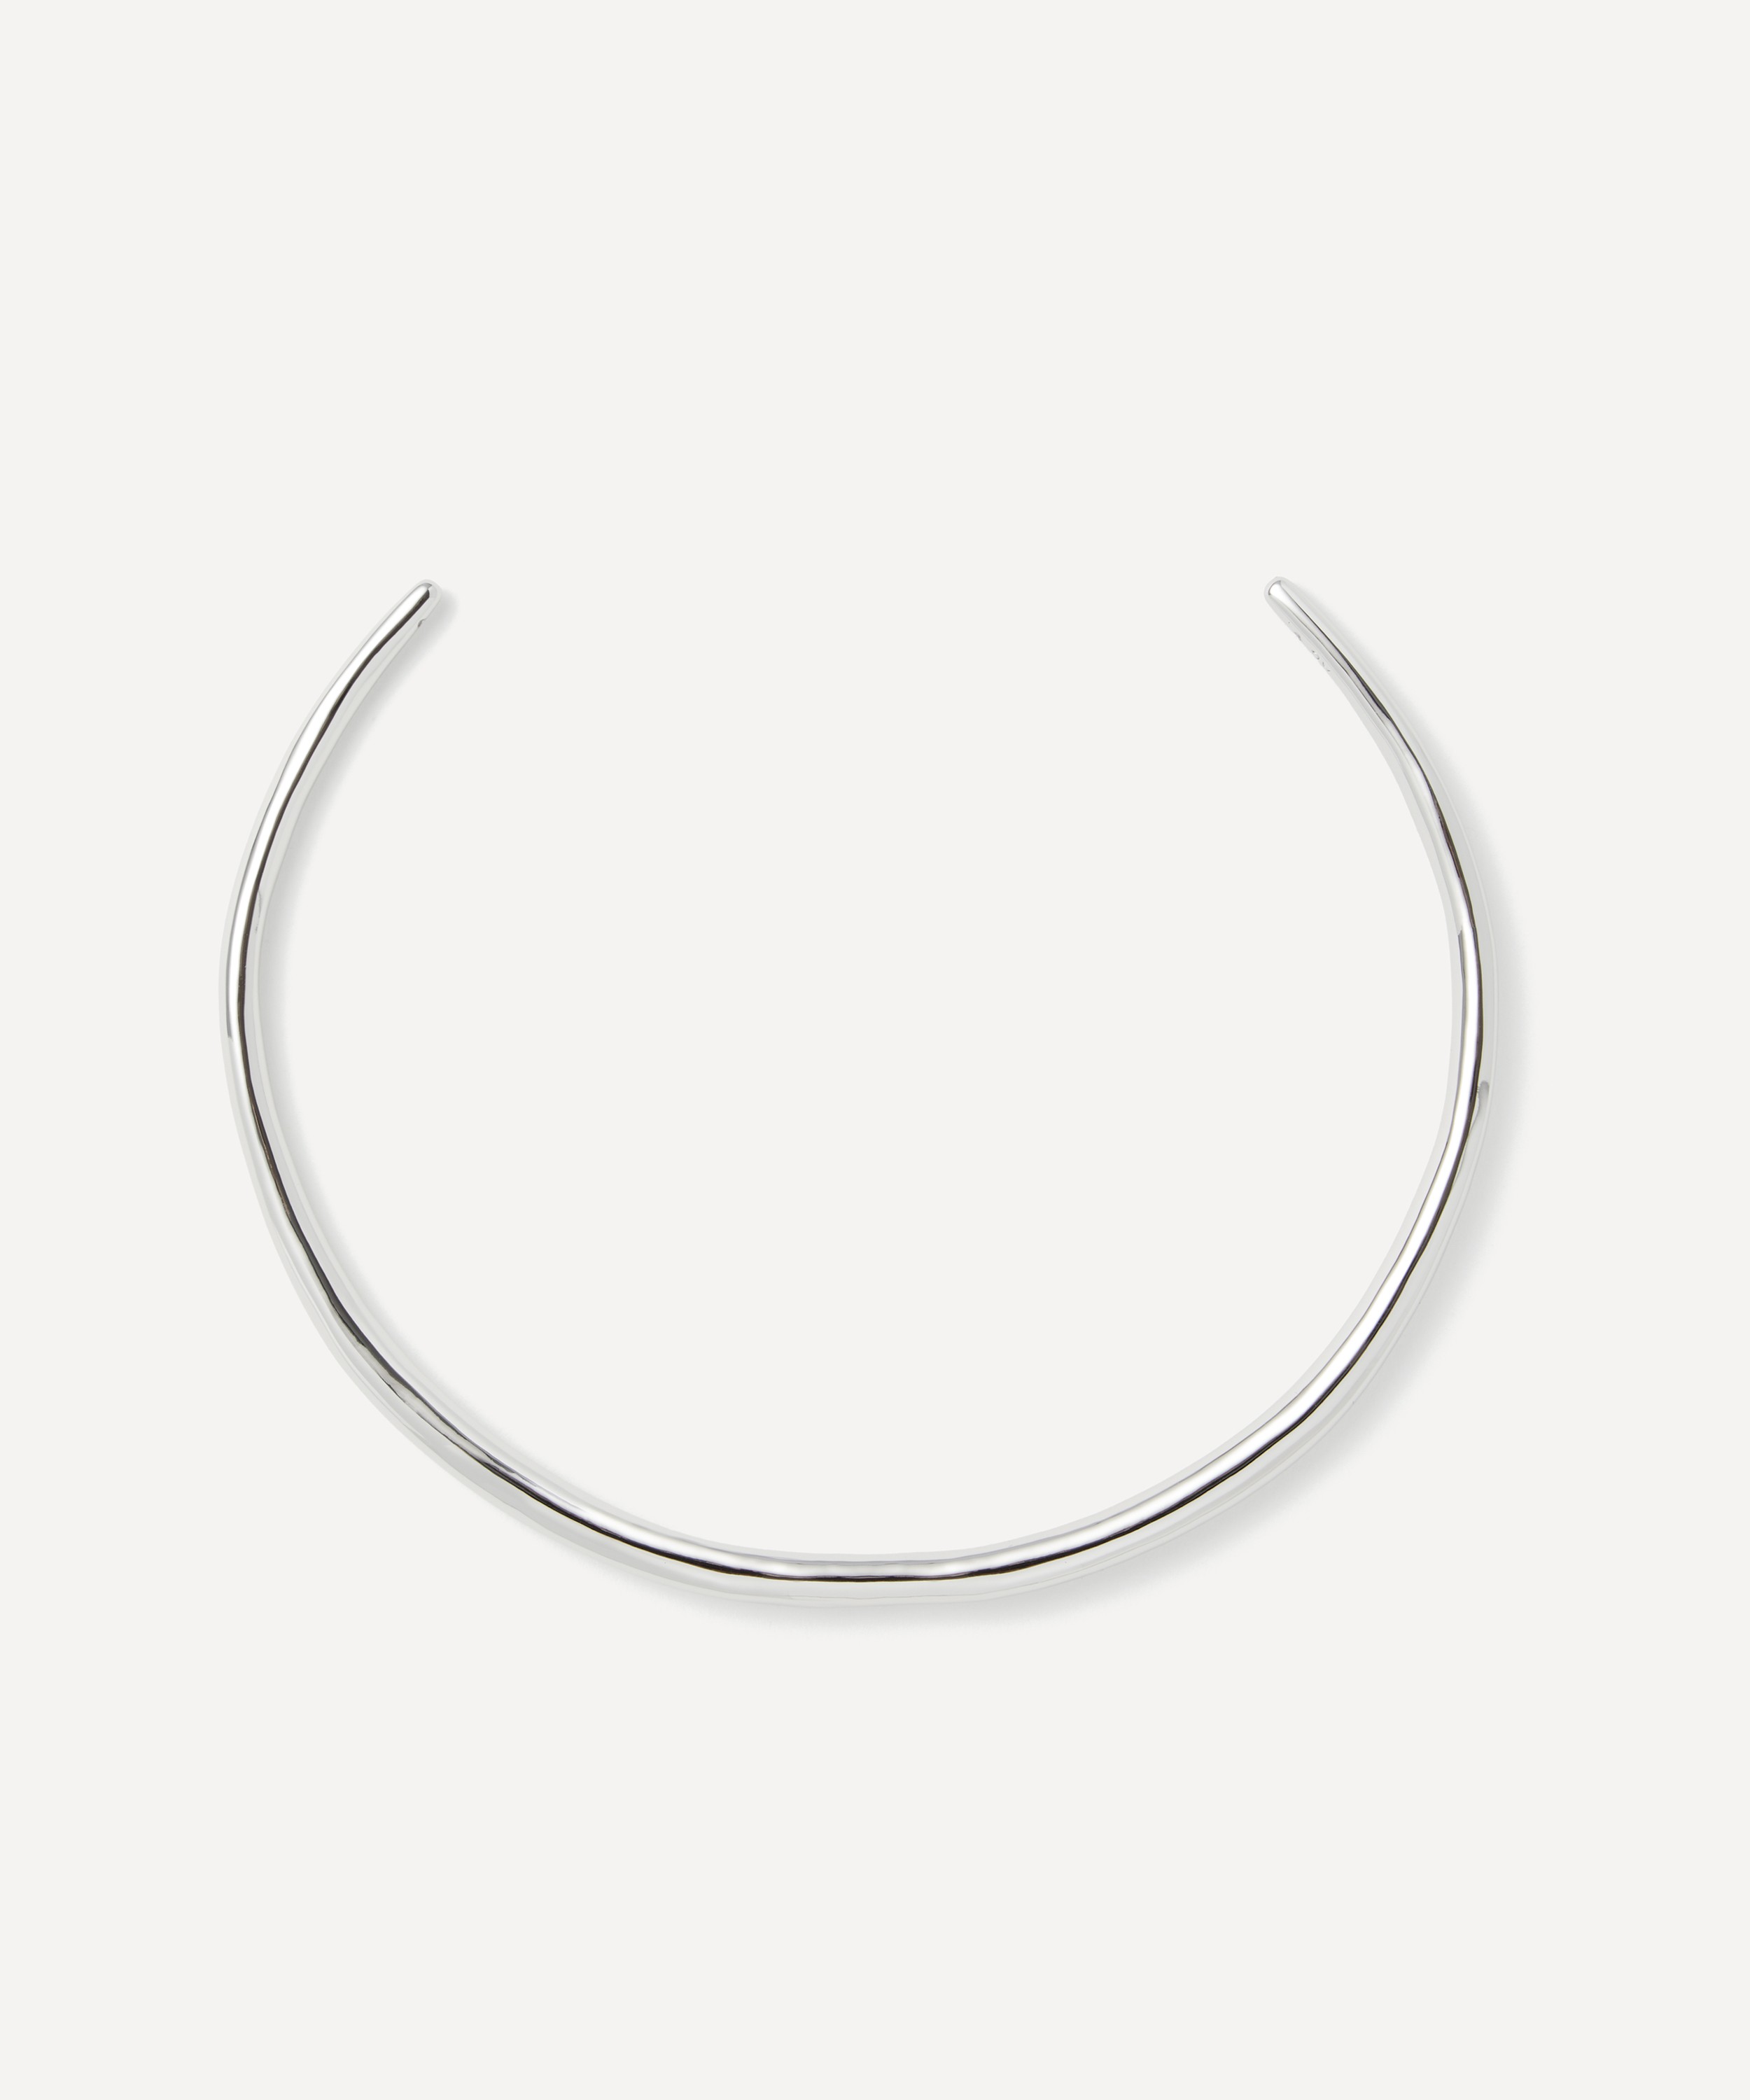 Alexis Bittar - Rhodium-Plated Thin Collar Necklace image number 0